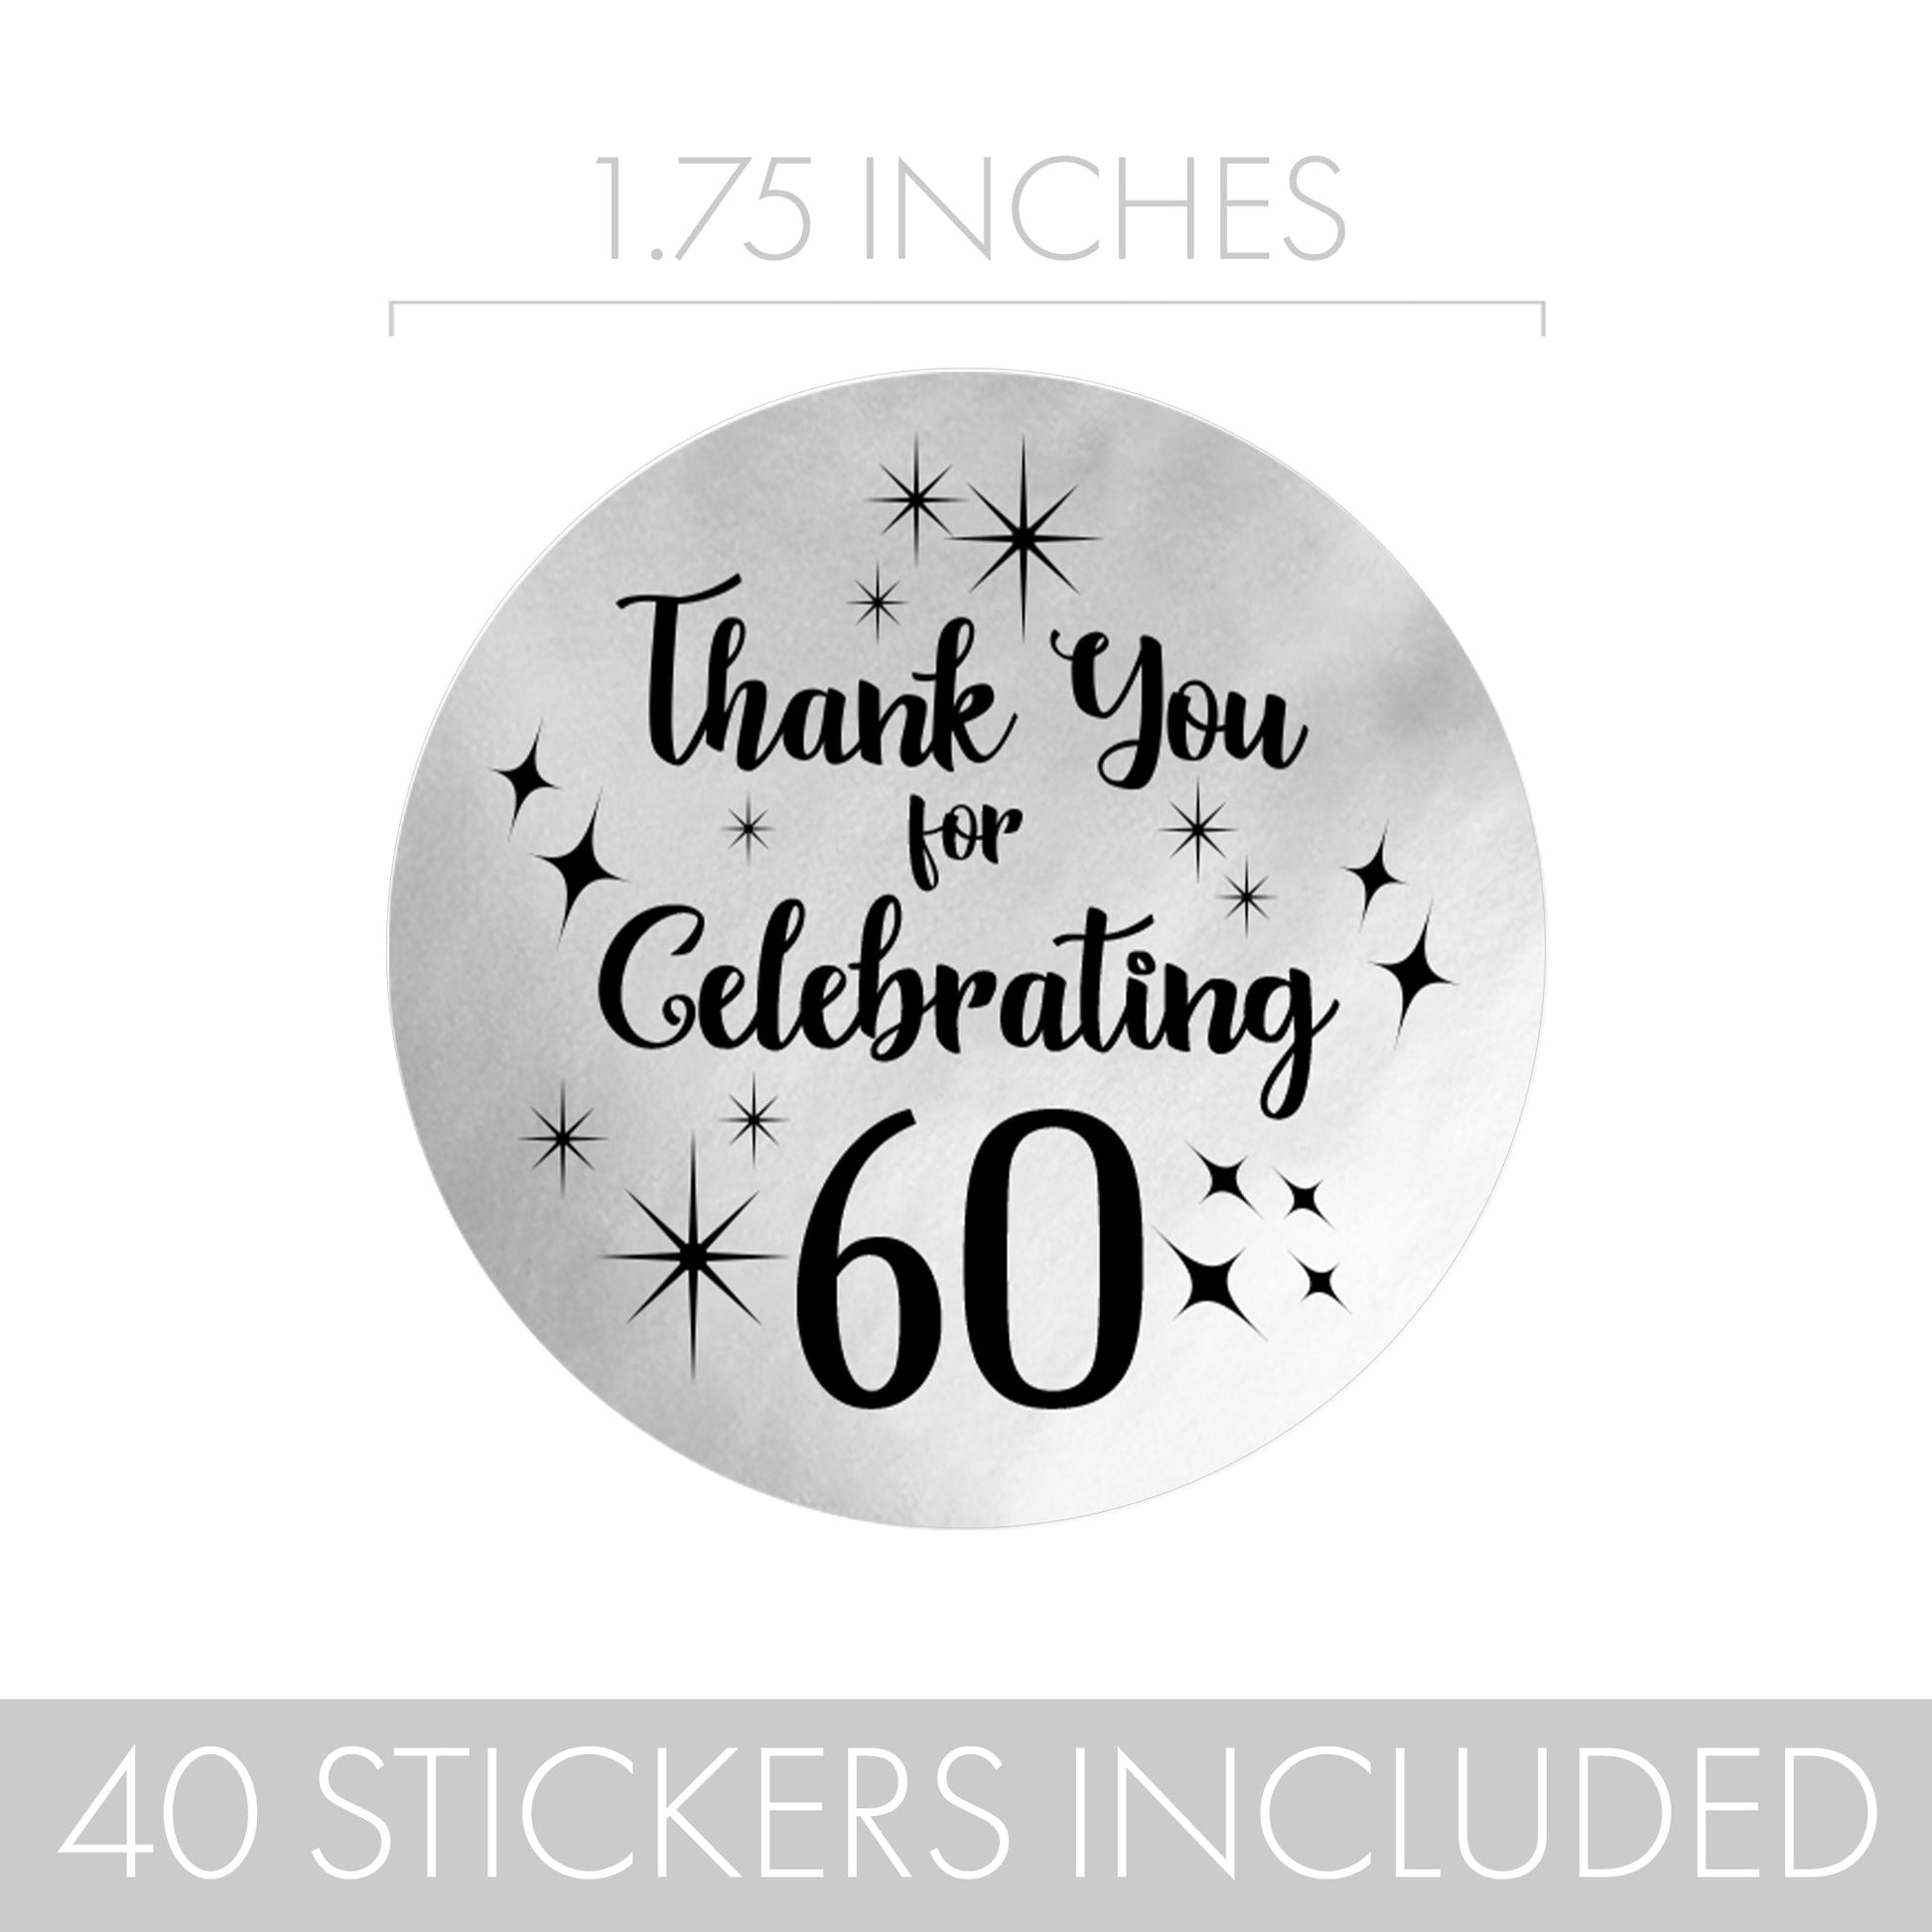 Make a statement with these fun and chic black and silver 60th birthday thank you stickers.